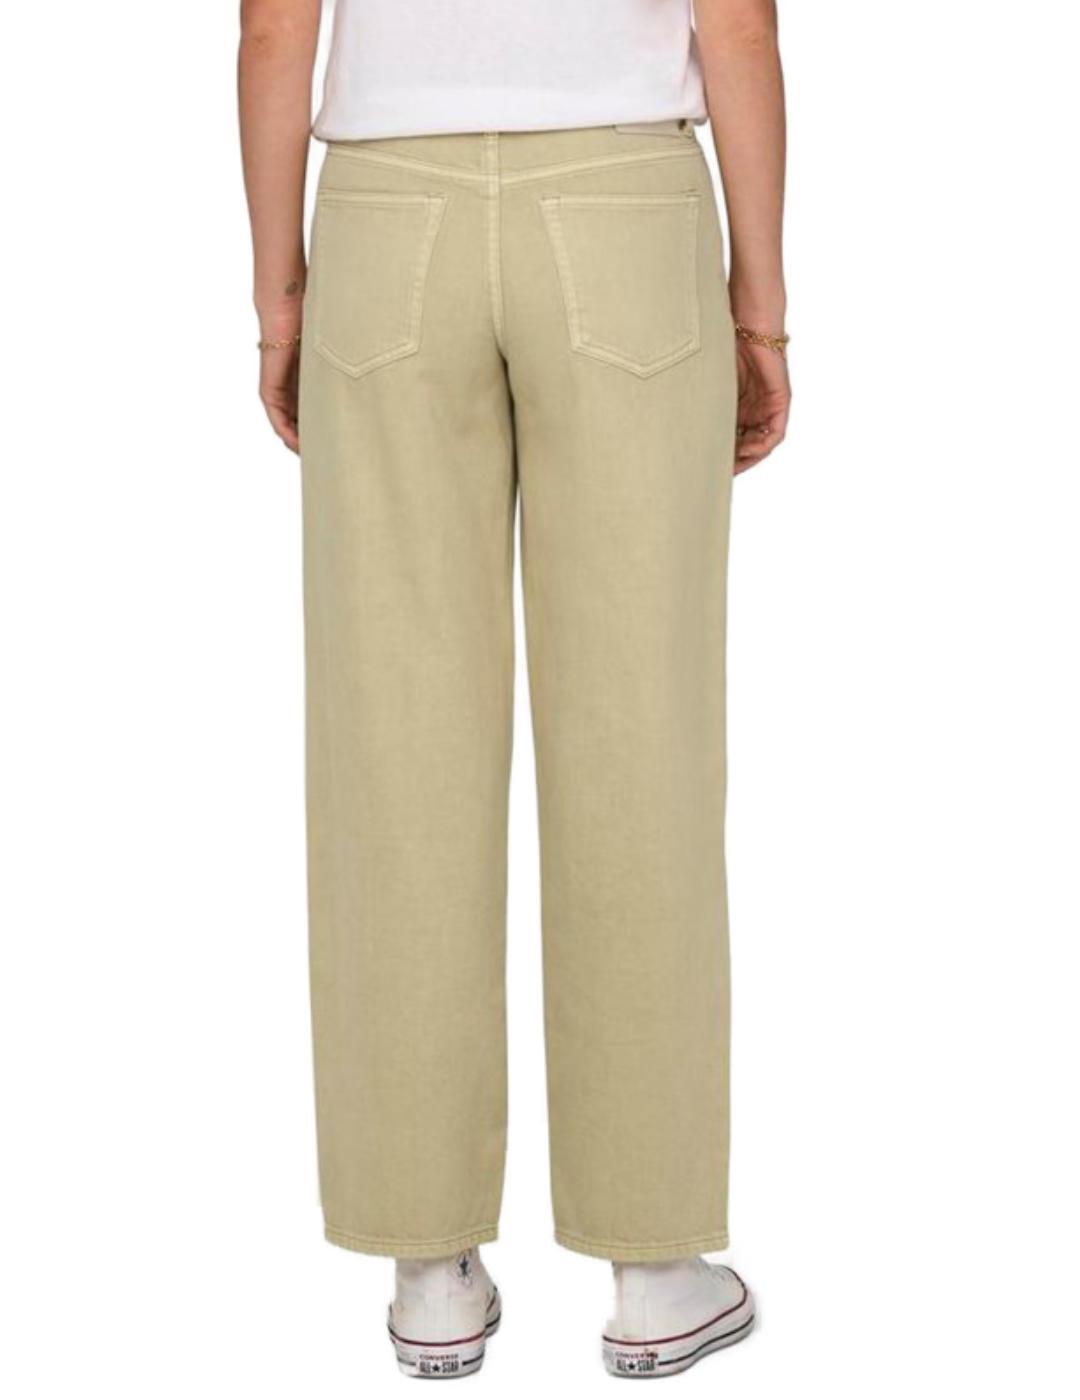 Pantalón Only Collette beige corte loose para mujer